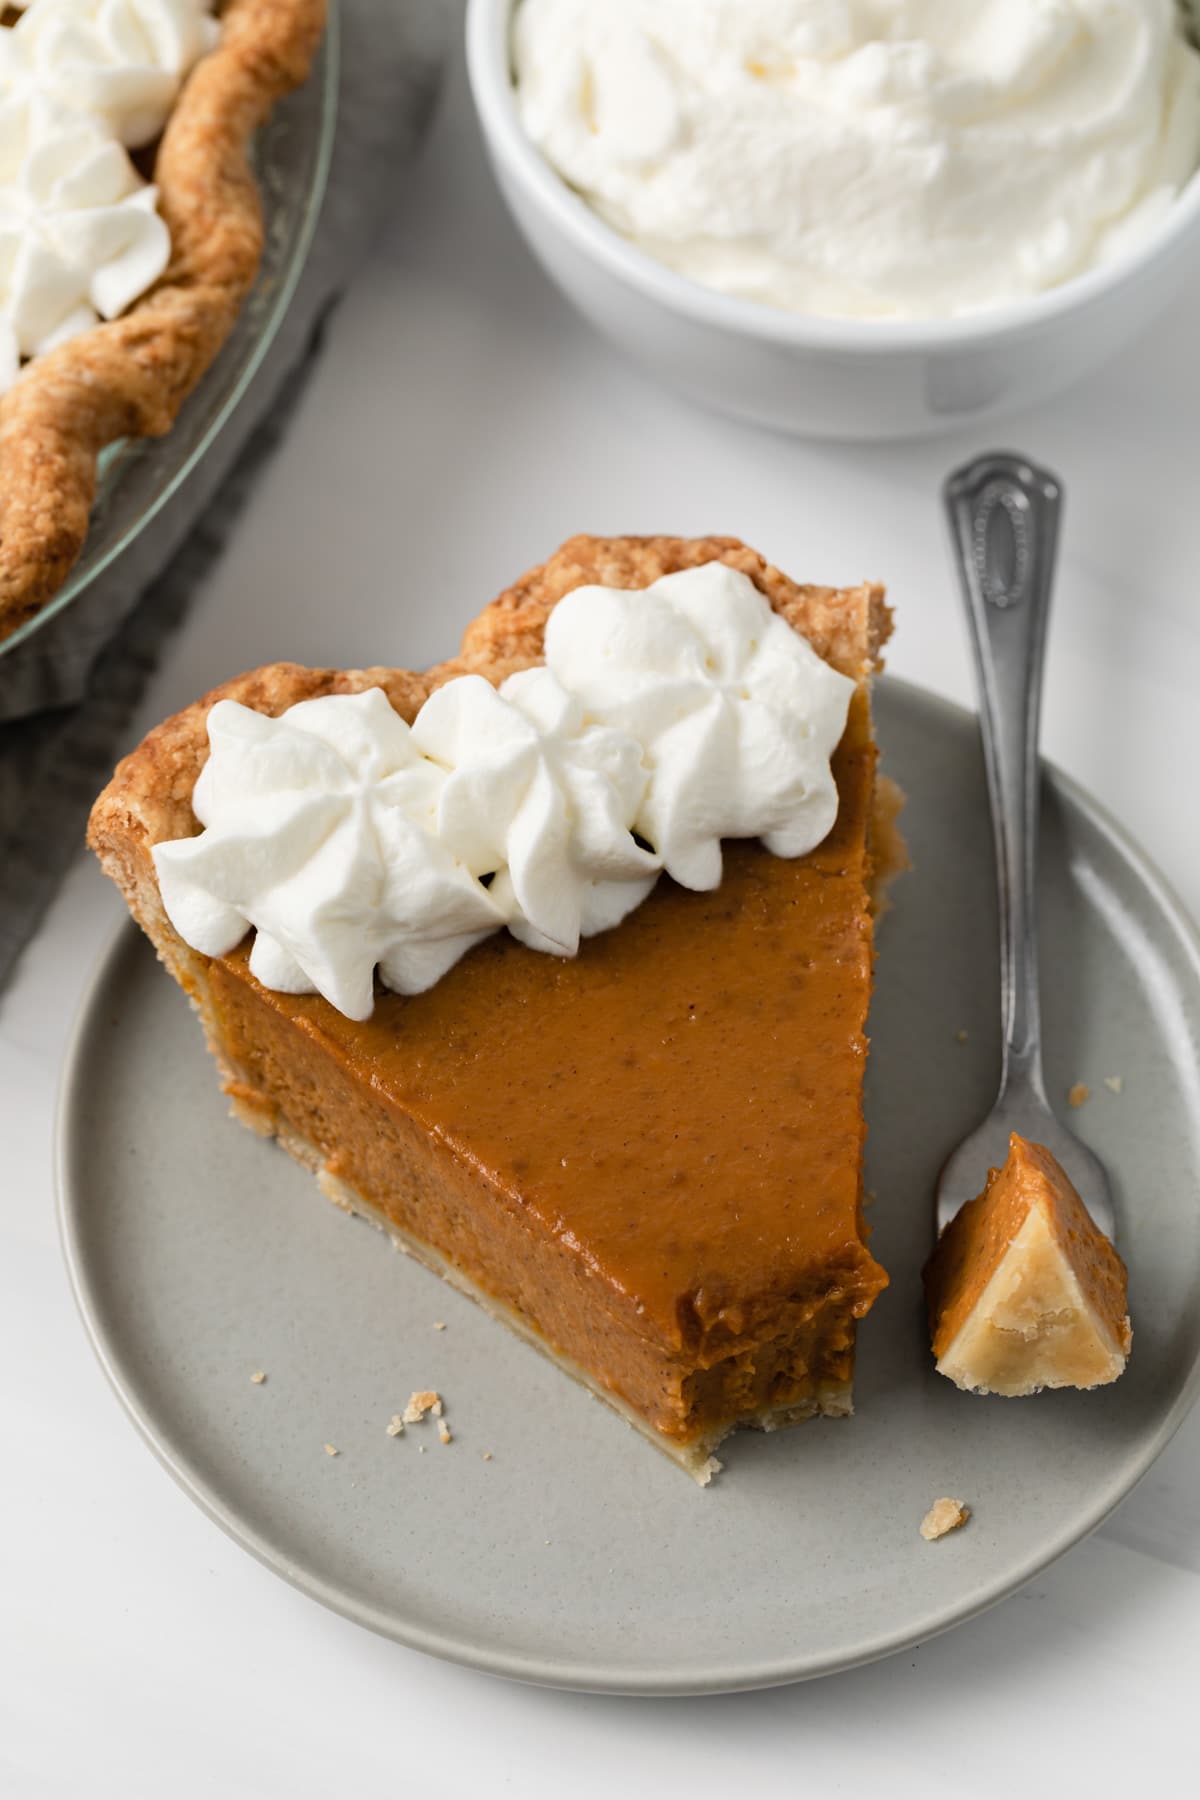 high angled view of pumpkin pie slice on plate with fork taking bite out